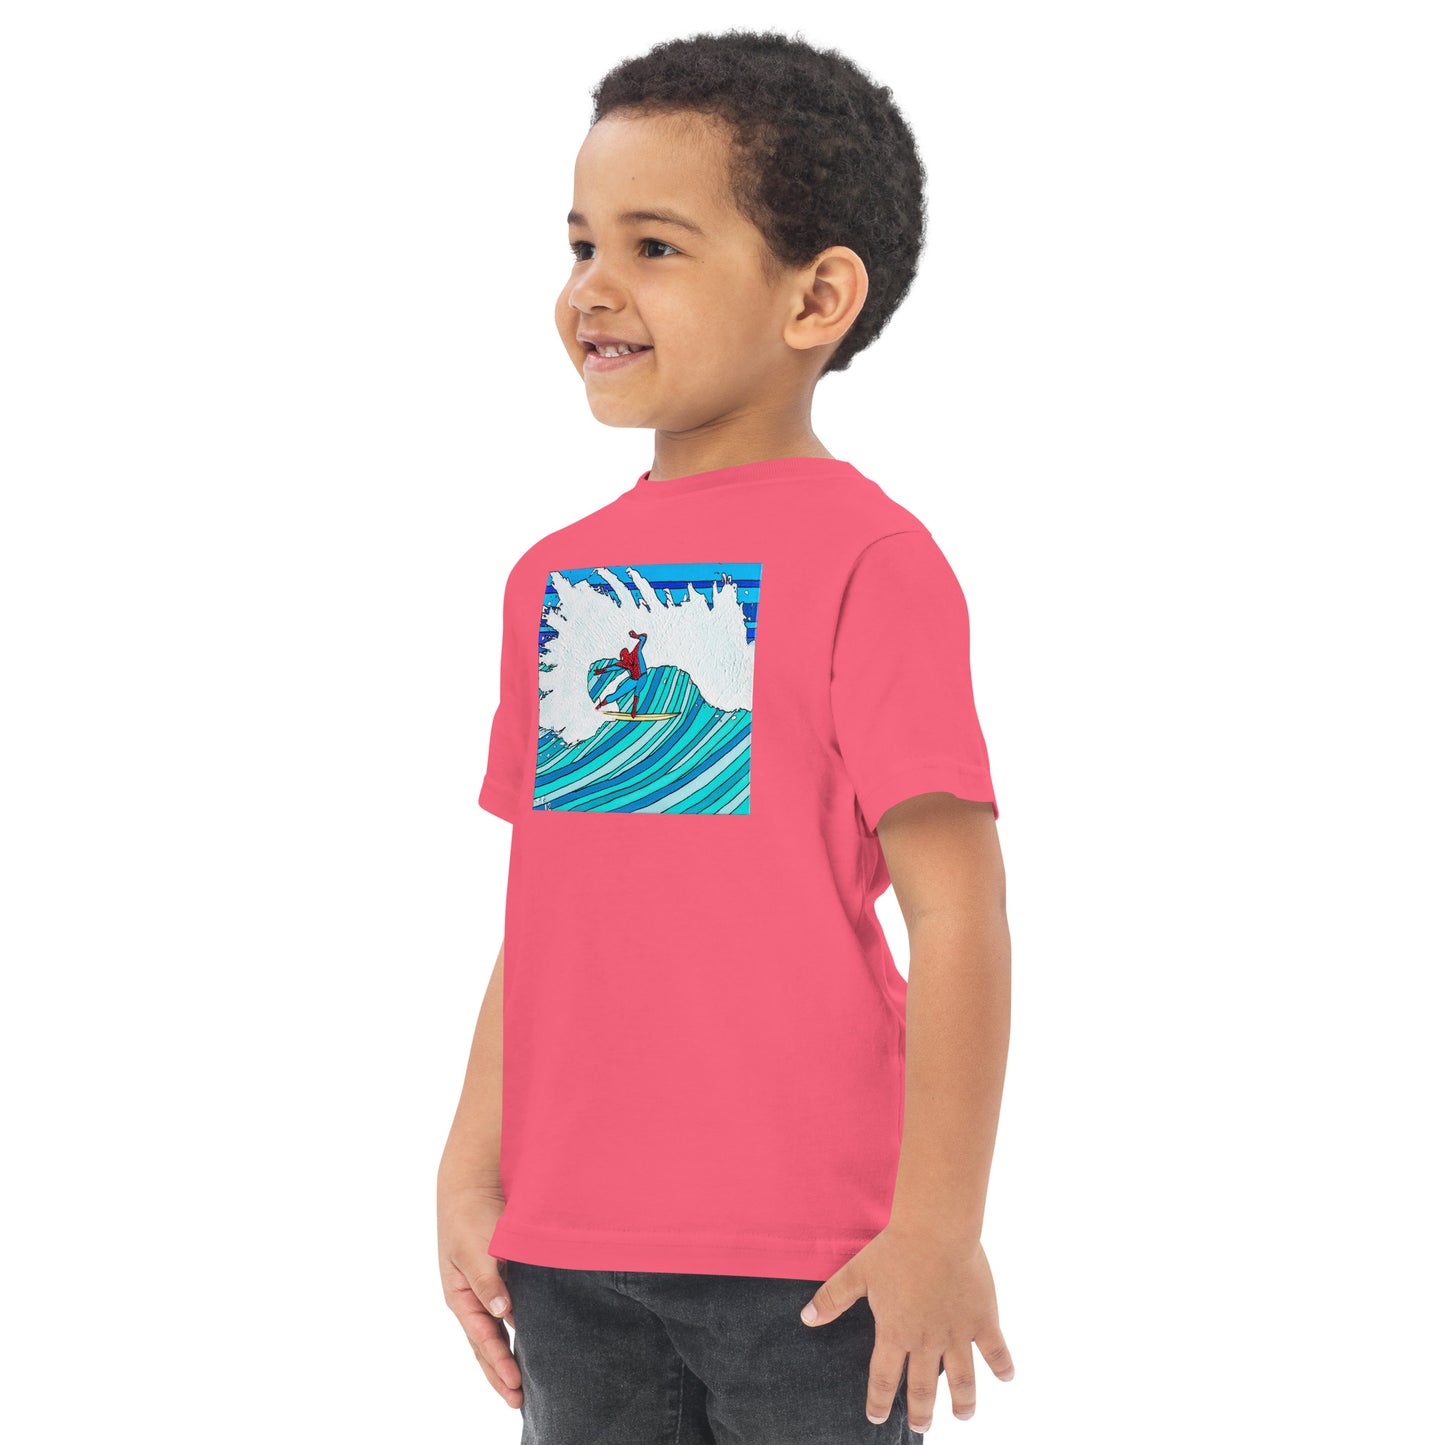 Spidey Style - Toddler jersey t-shirt